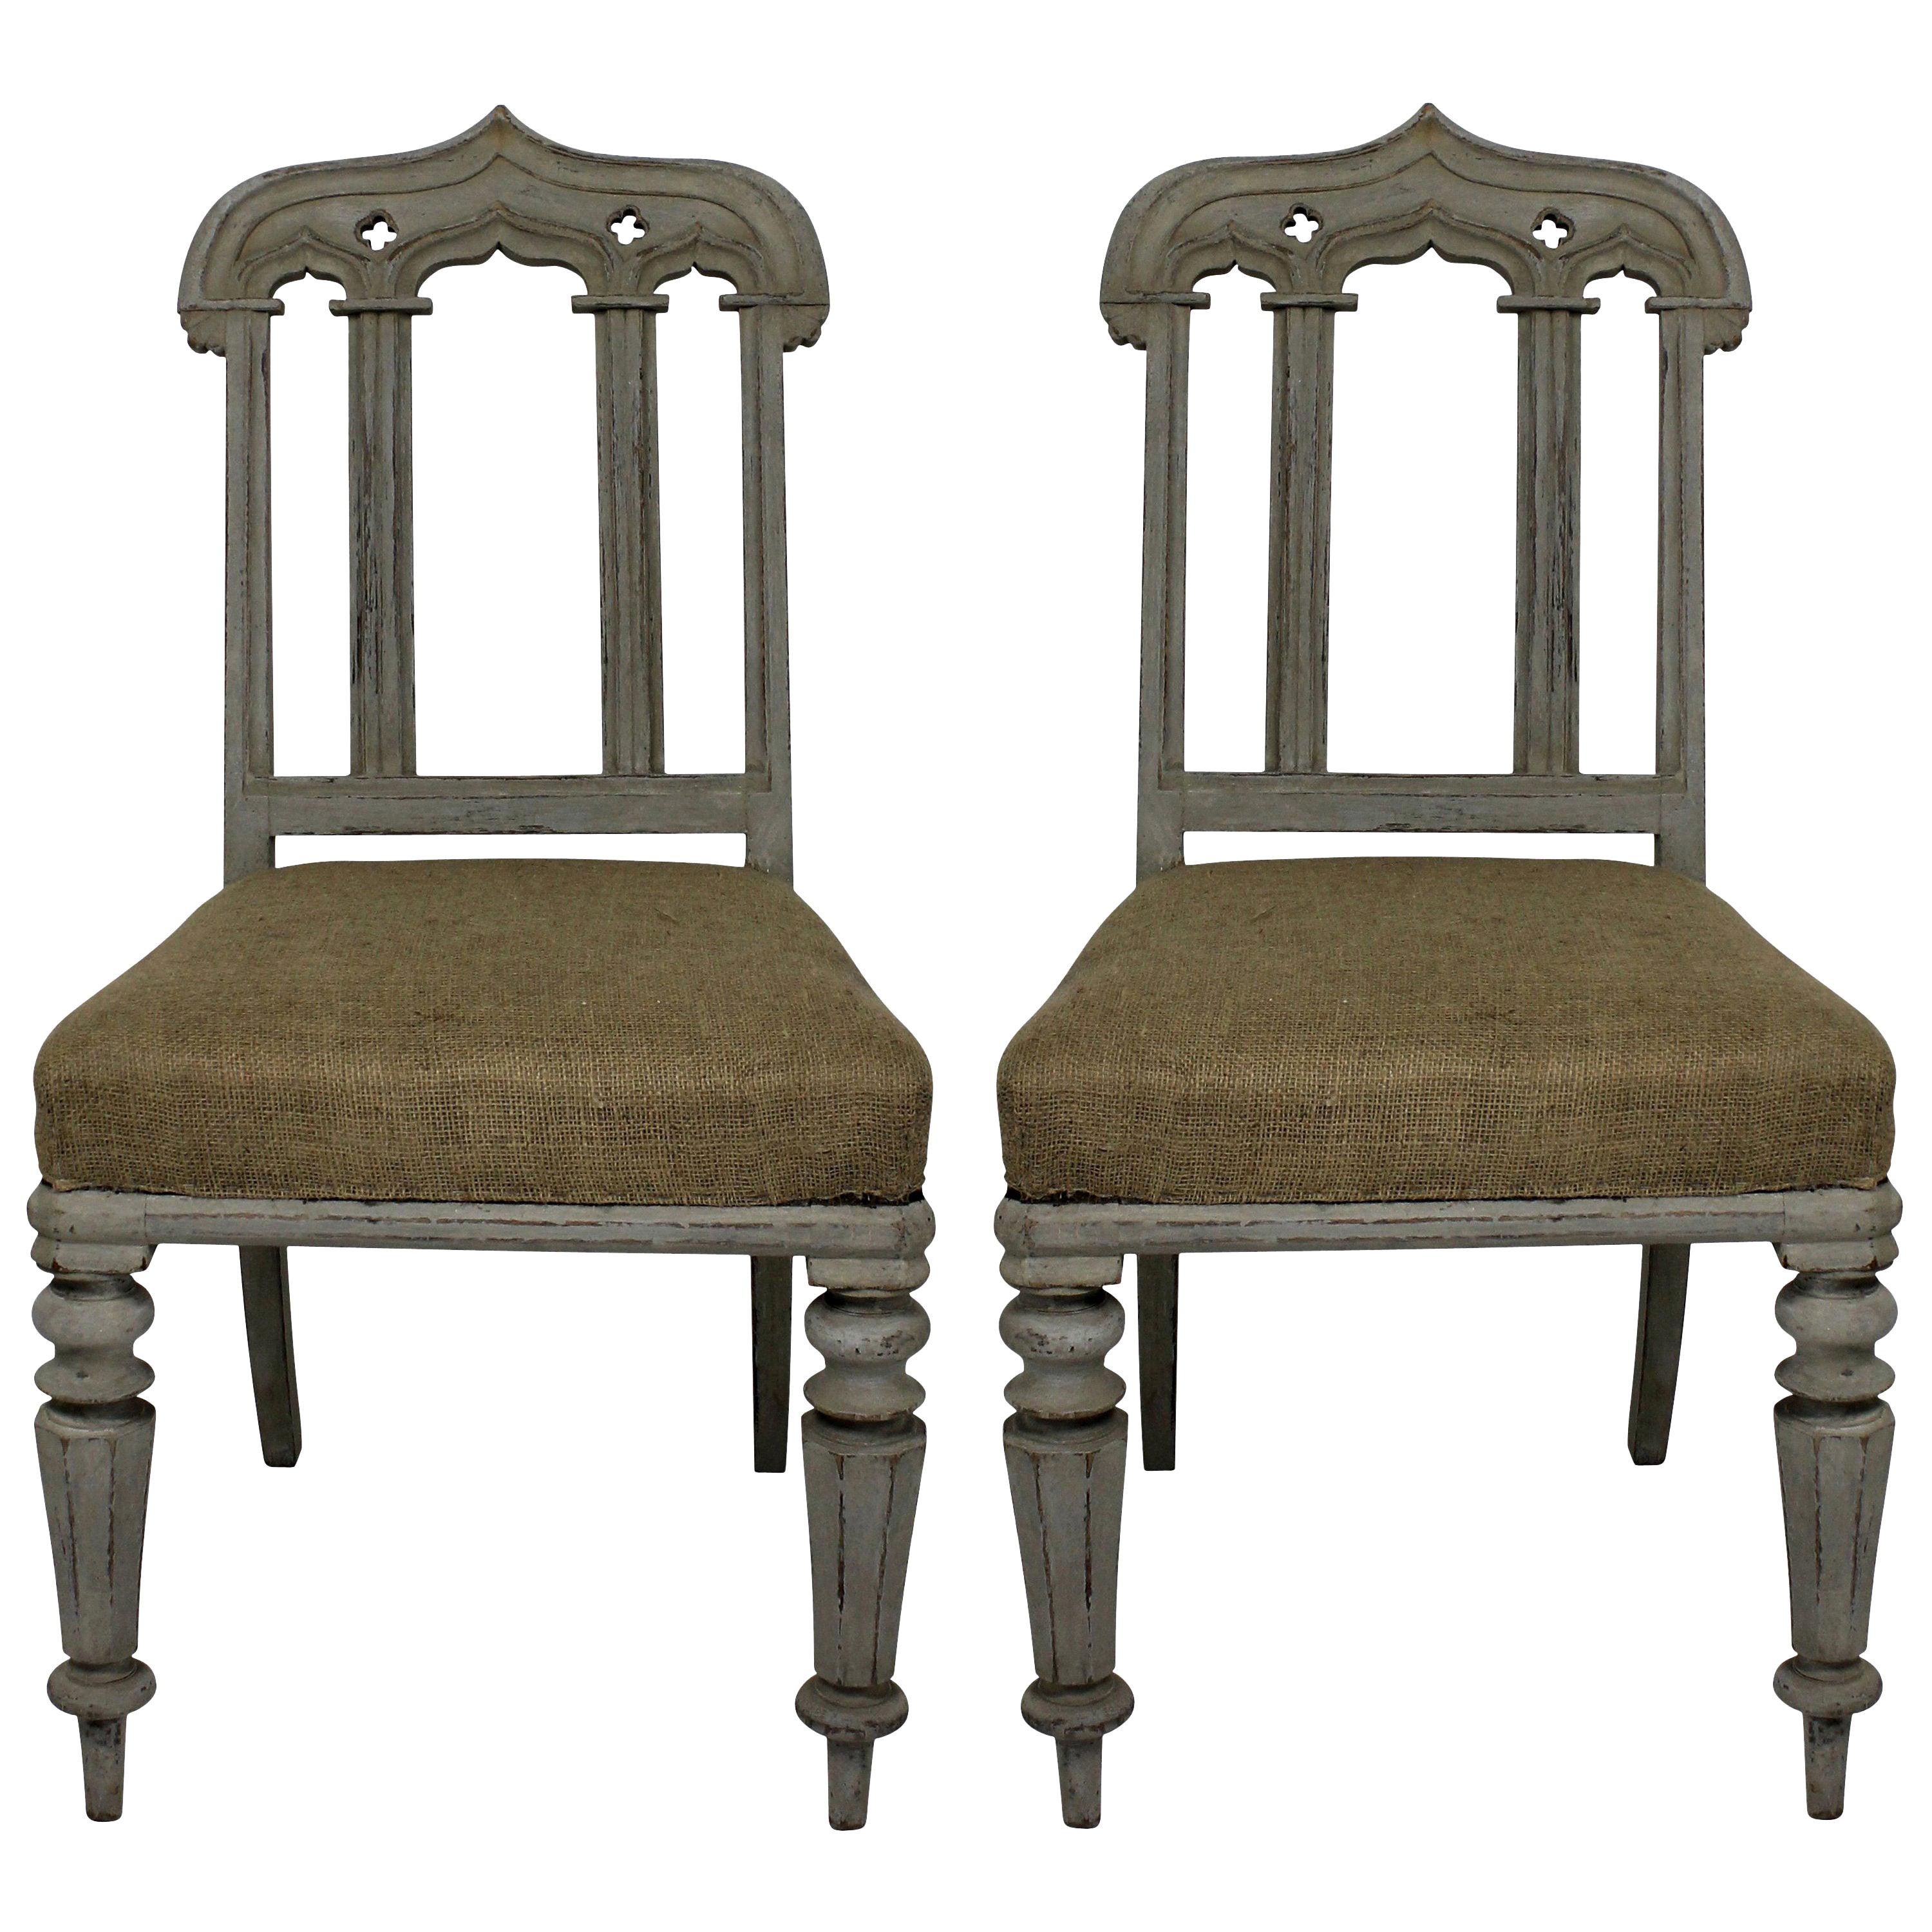 Pair of William IV Painted Gothic Revival Chairs